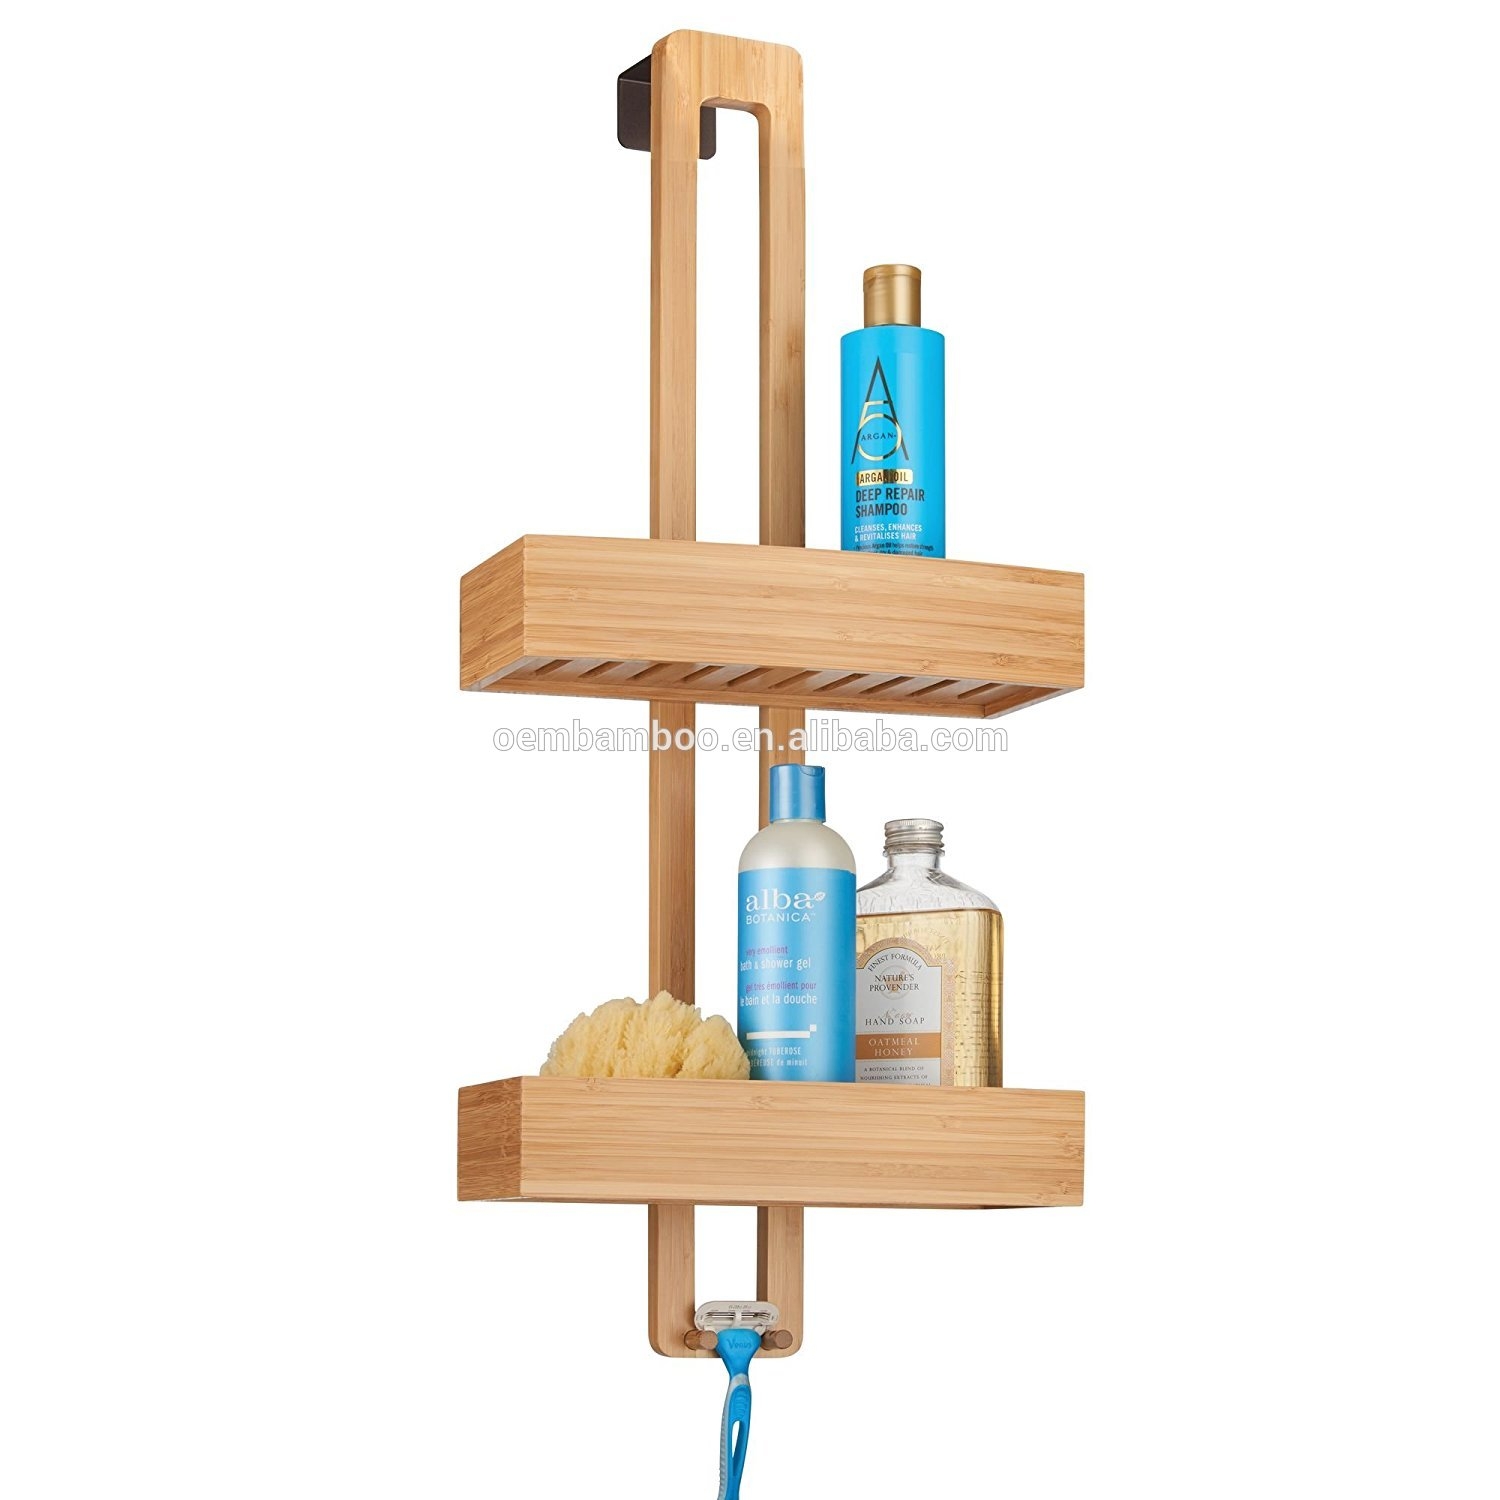 Satin Hanging Bathroom Organiser with Hooks for Loofahs mDesign Over Door Shower Caddy Toiletry Storage Shelves